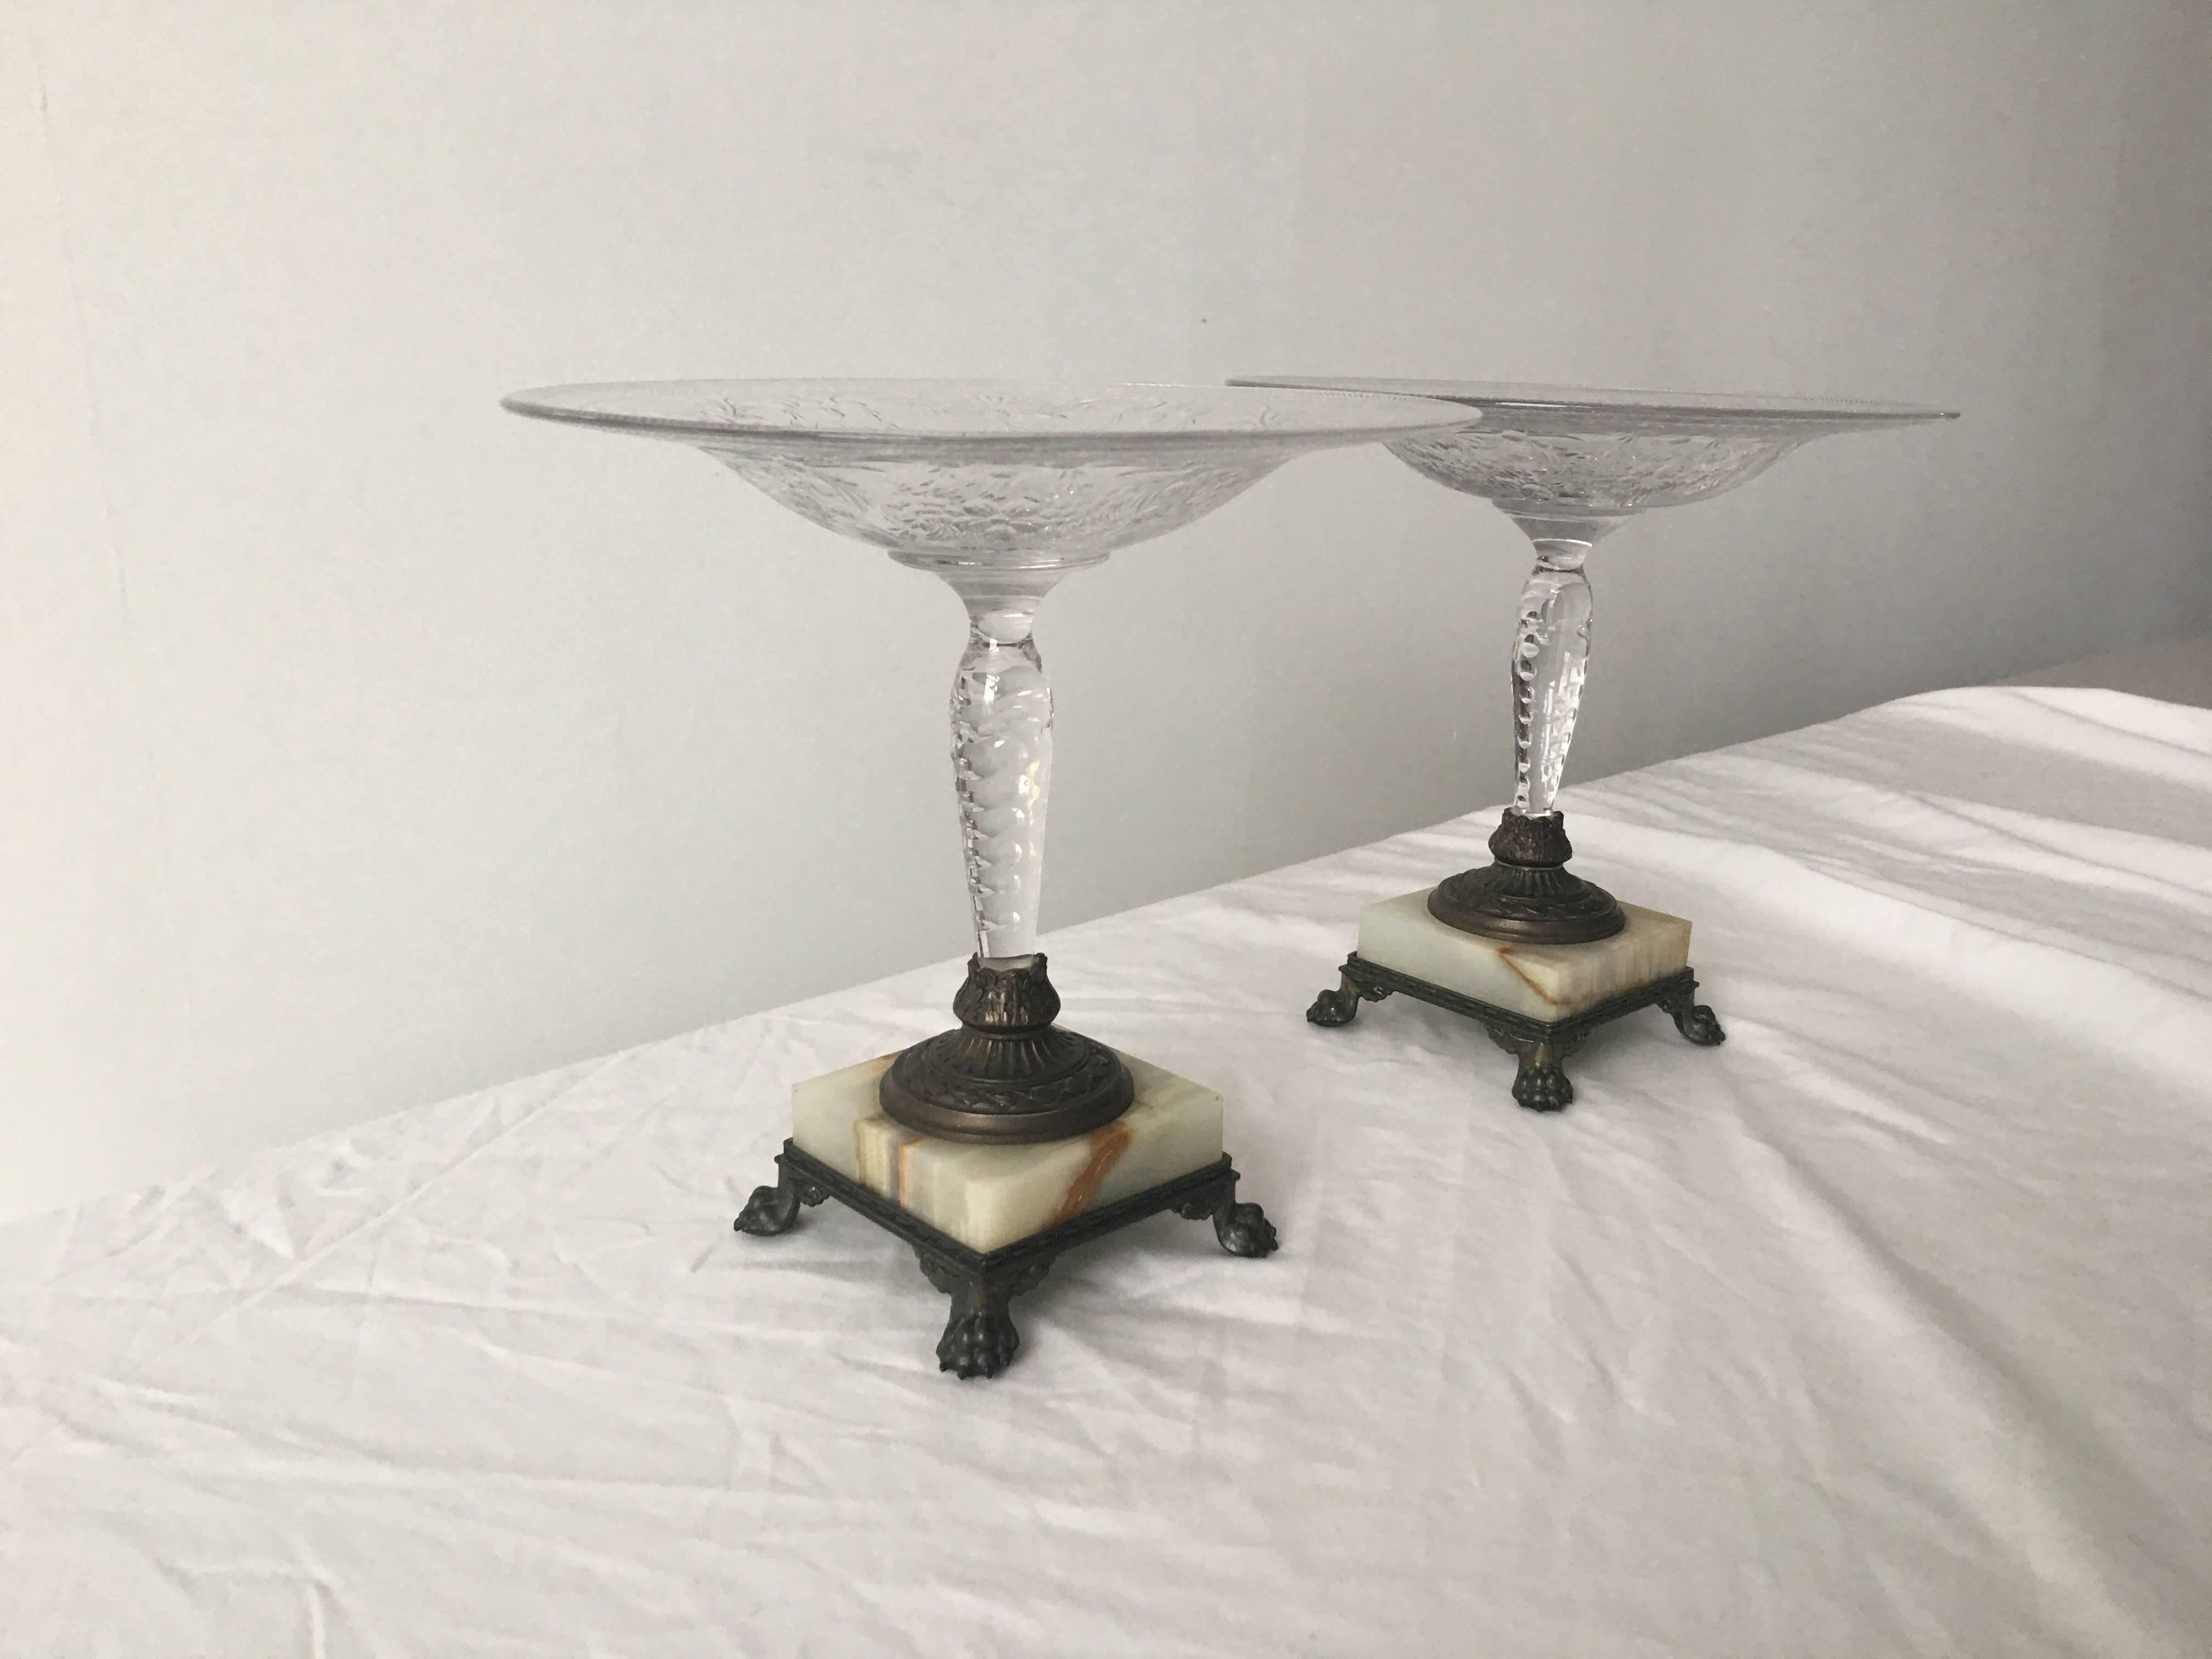 Offered is an immaculate pair of 1910s-1920s pairpoint compotes. Absolutely stunning detail in the etched crystal, the bronze clawfeet, and the marble. Marked: C1481 on underside truly excellent condition. Not a single scratch in the crystal. No